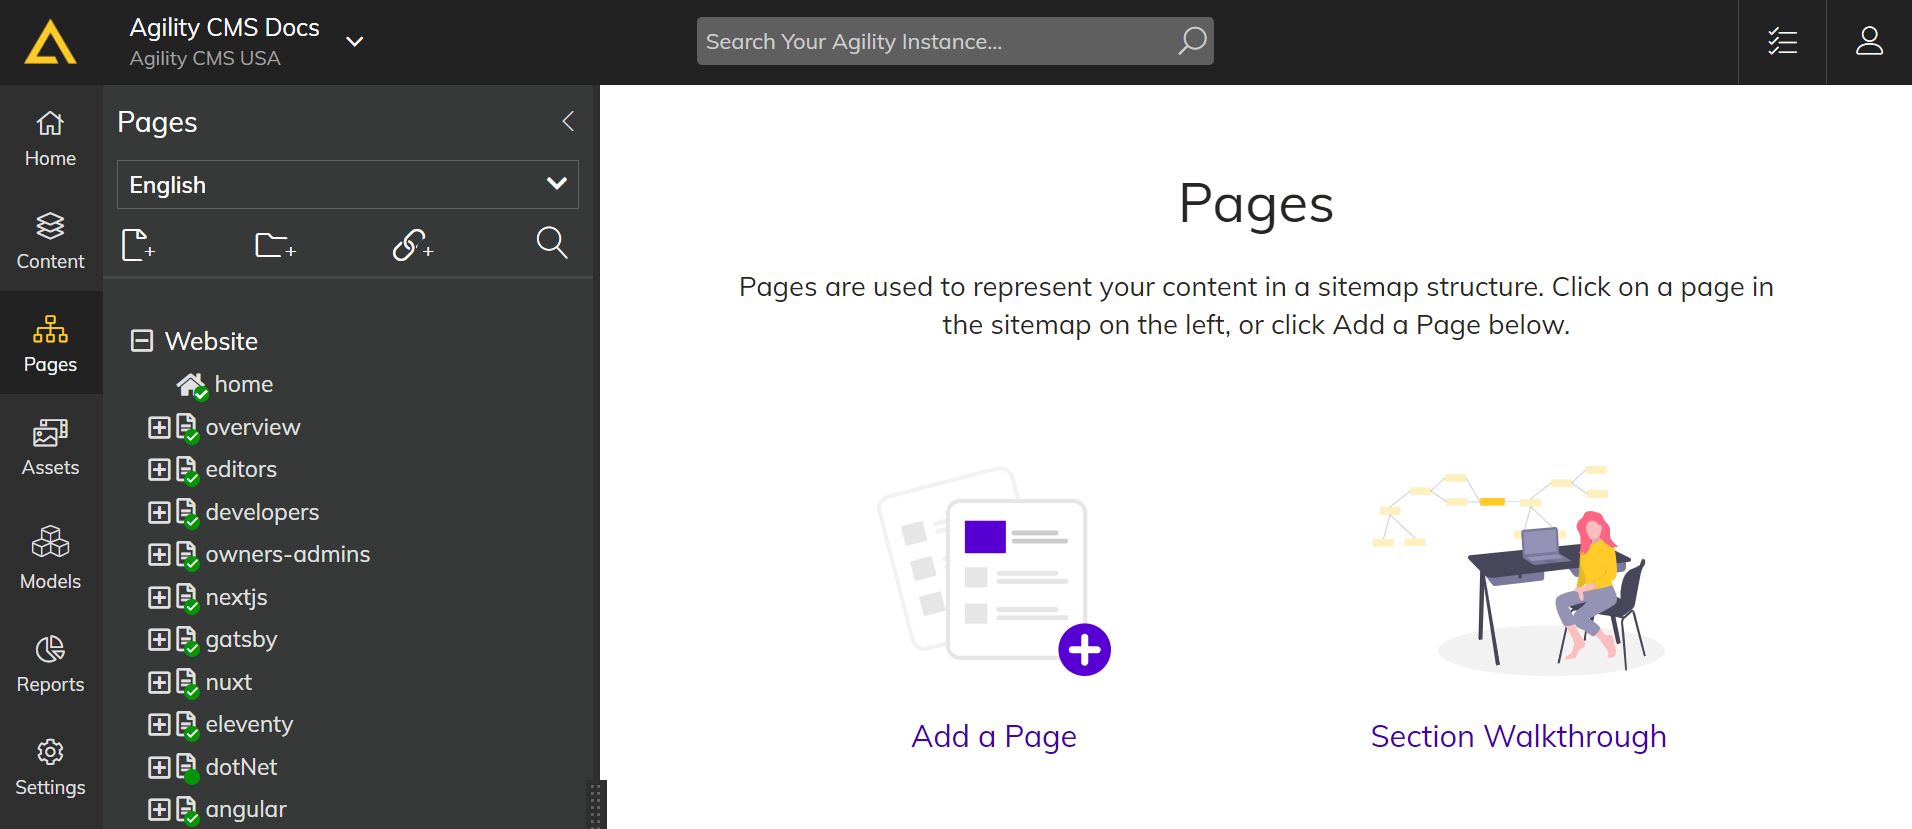 Pages for editors to manage content with Agility CMS